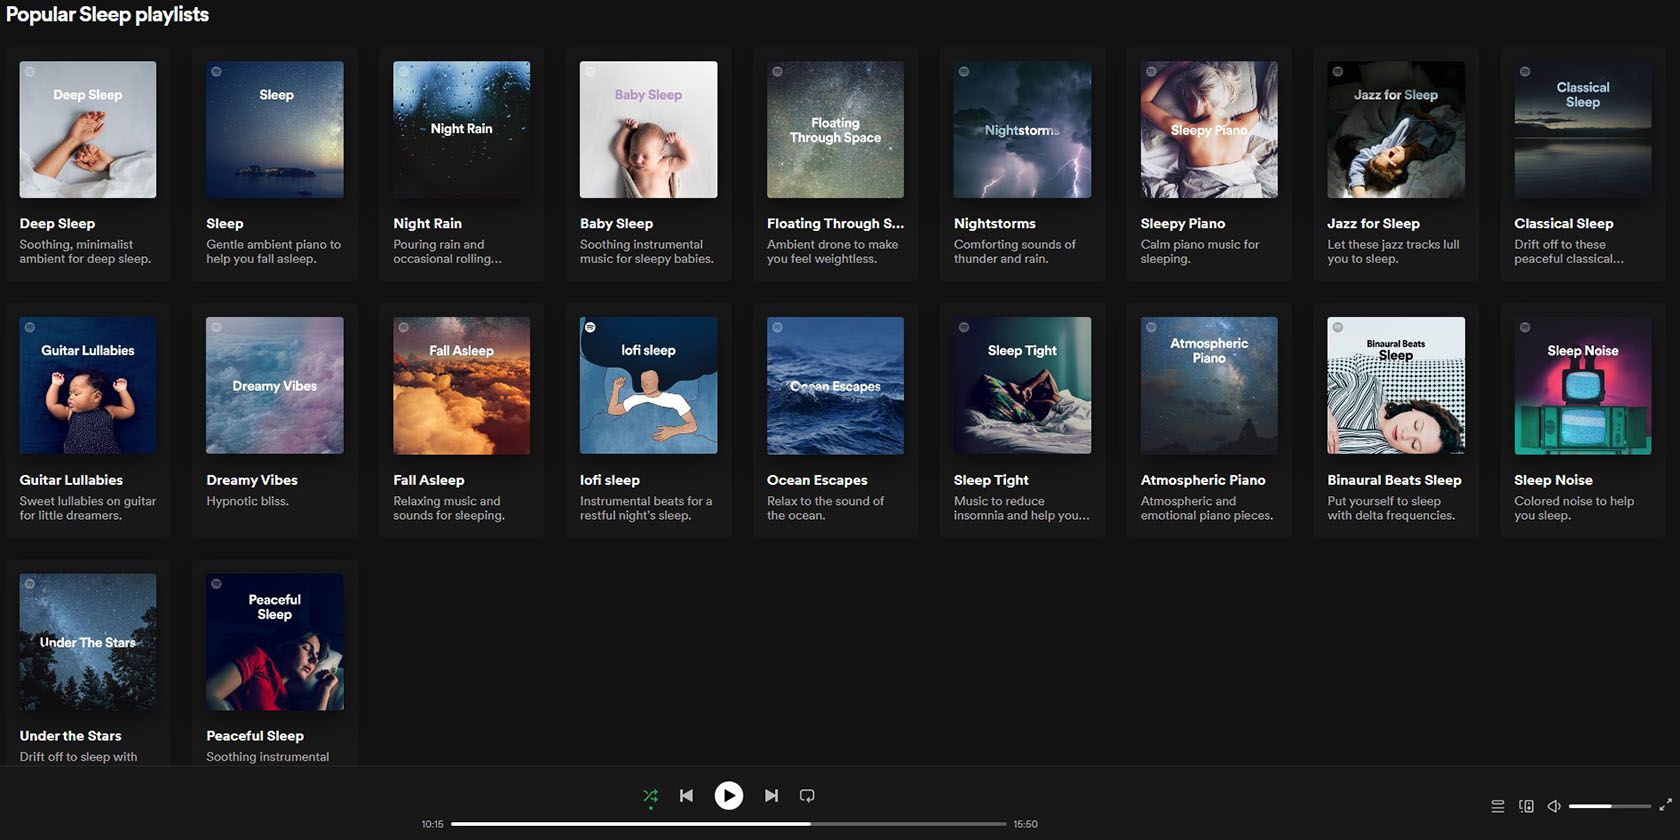 Spotify Sleep Playlists entire collection